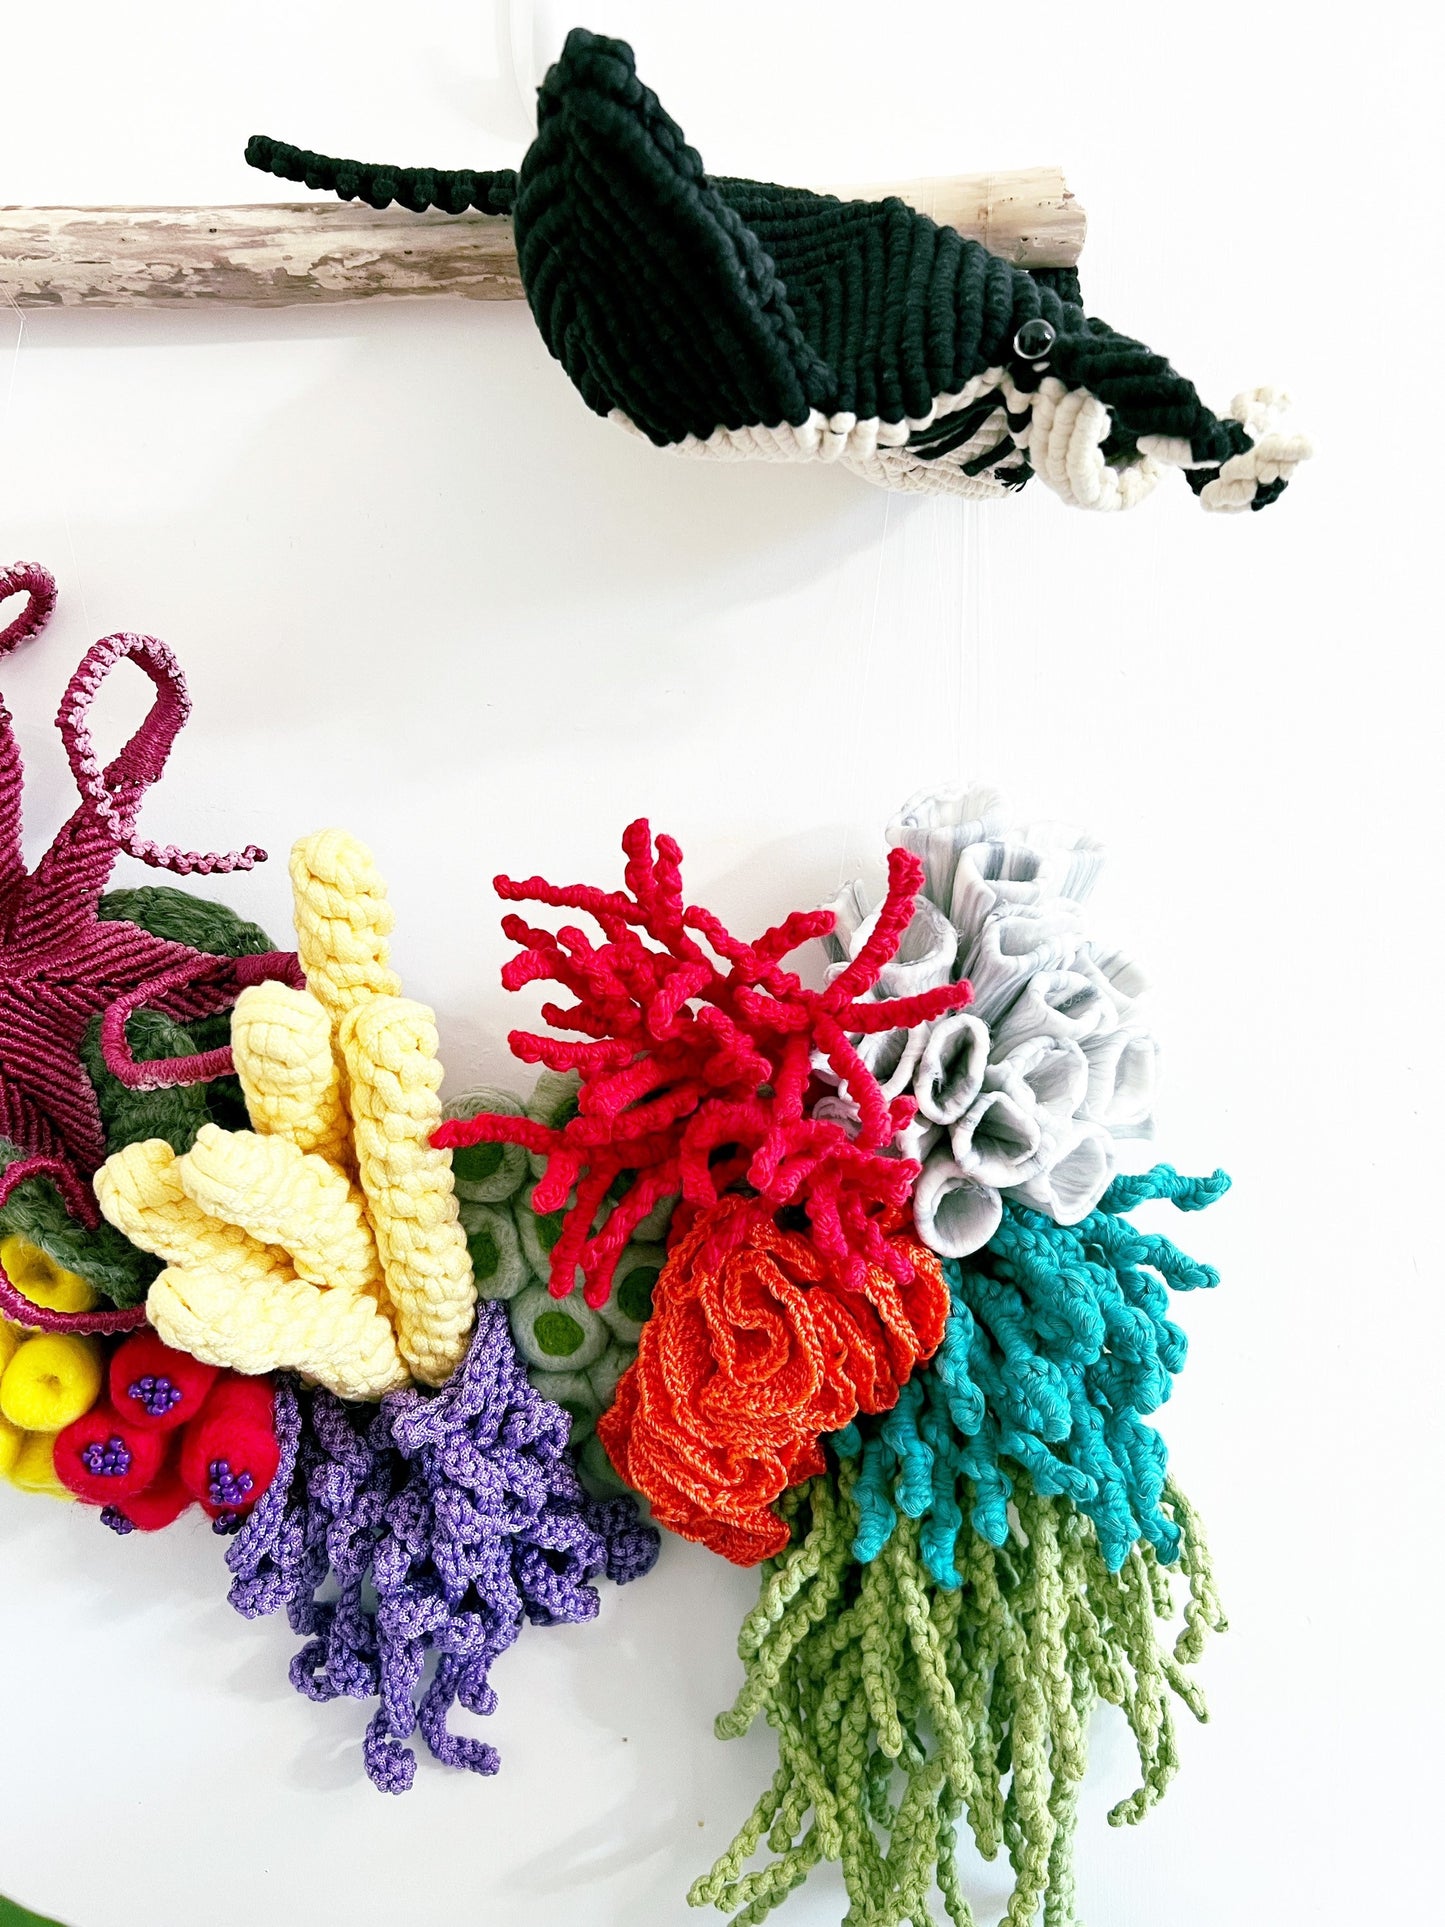 COMMISSION ONLY //Commission order Small Macrame Ocean art/Coral reef art/ Macrame barrier reef/macrame corals/macrame fish/ Macrame Octopus